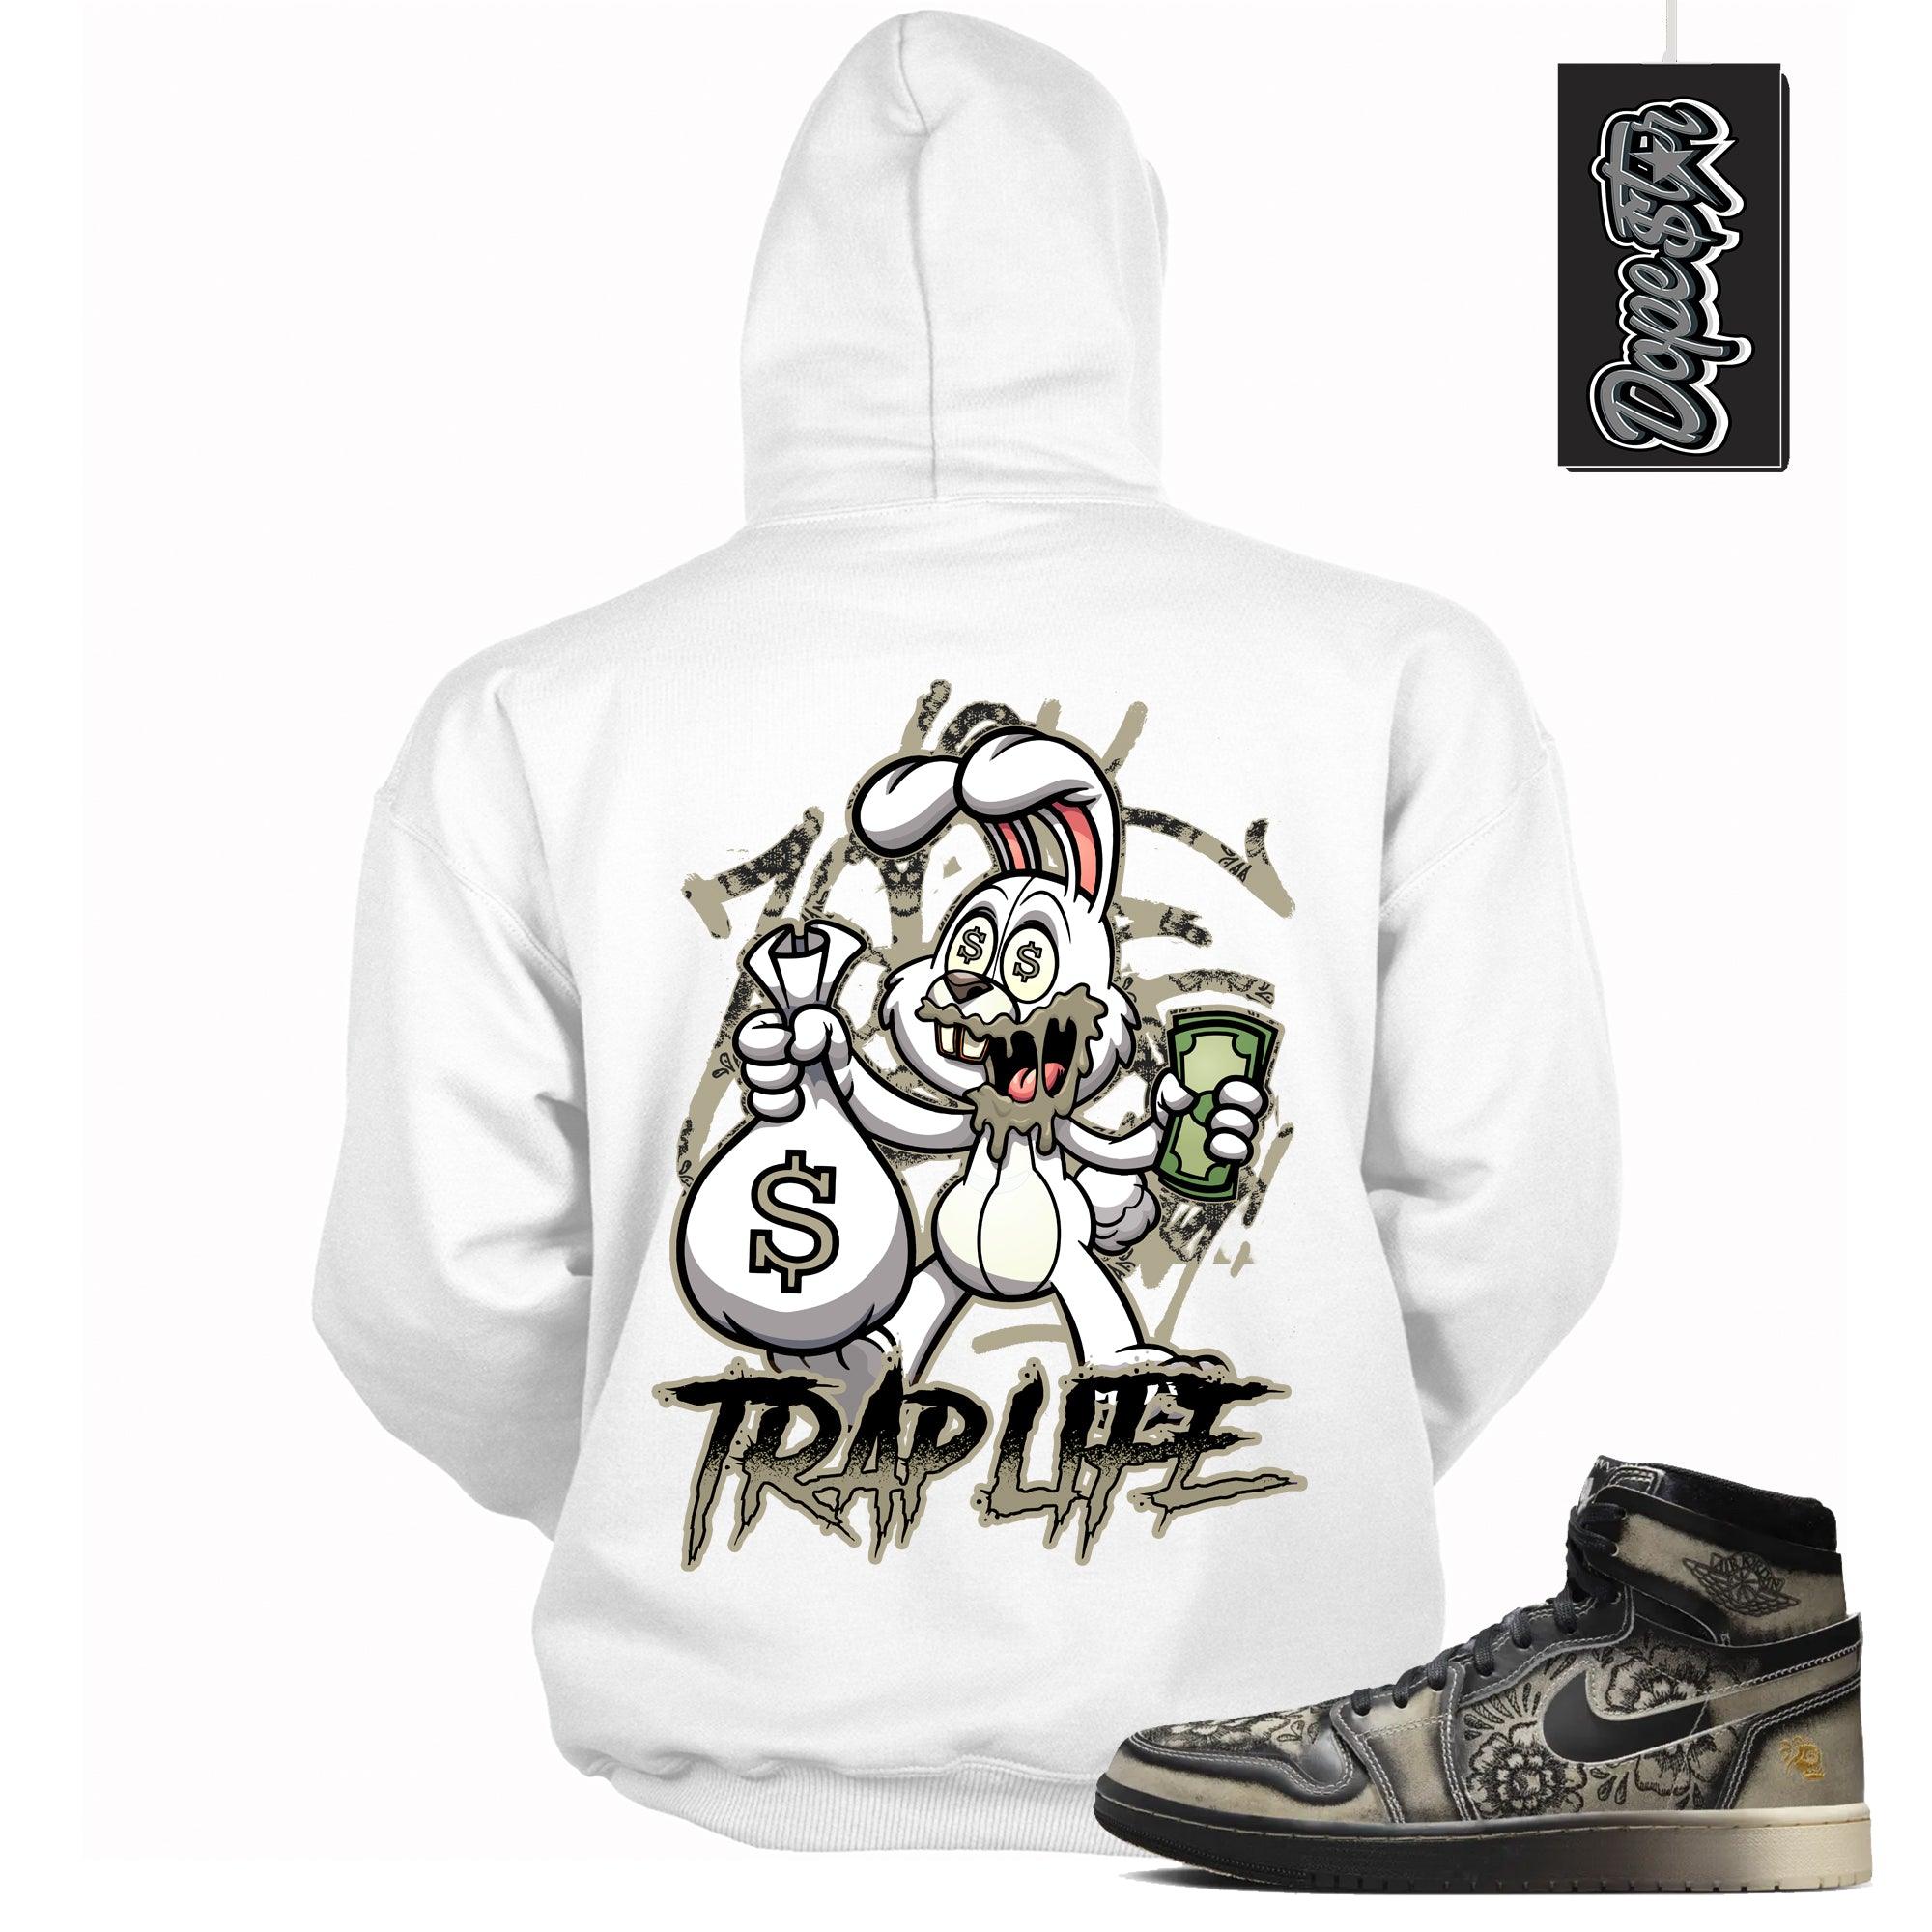 Cool White Graphic Hoodie with “ Trap Rabbit “ print, that perfectly matches Air Jordan 1 High Zoom Comfort 2 Dia de Muertos Black and Pale Ivory sneakers